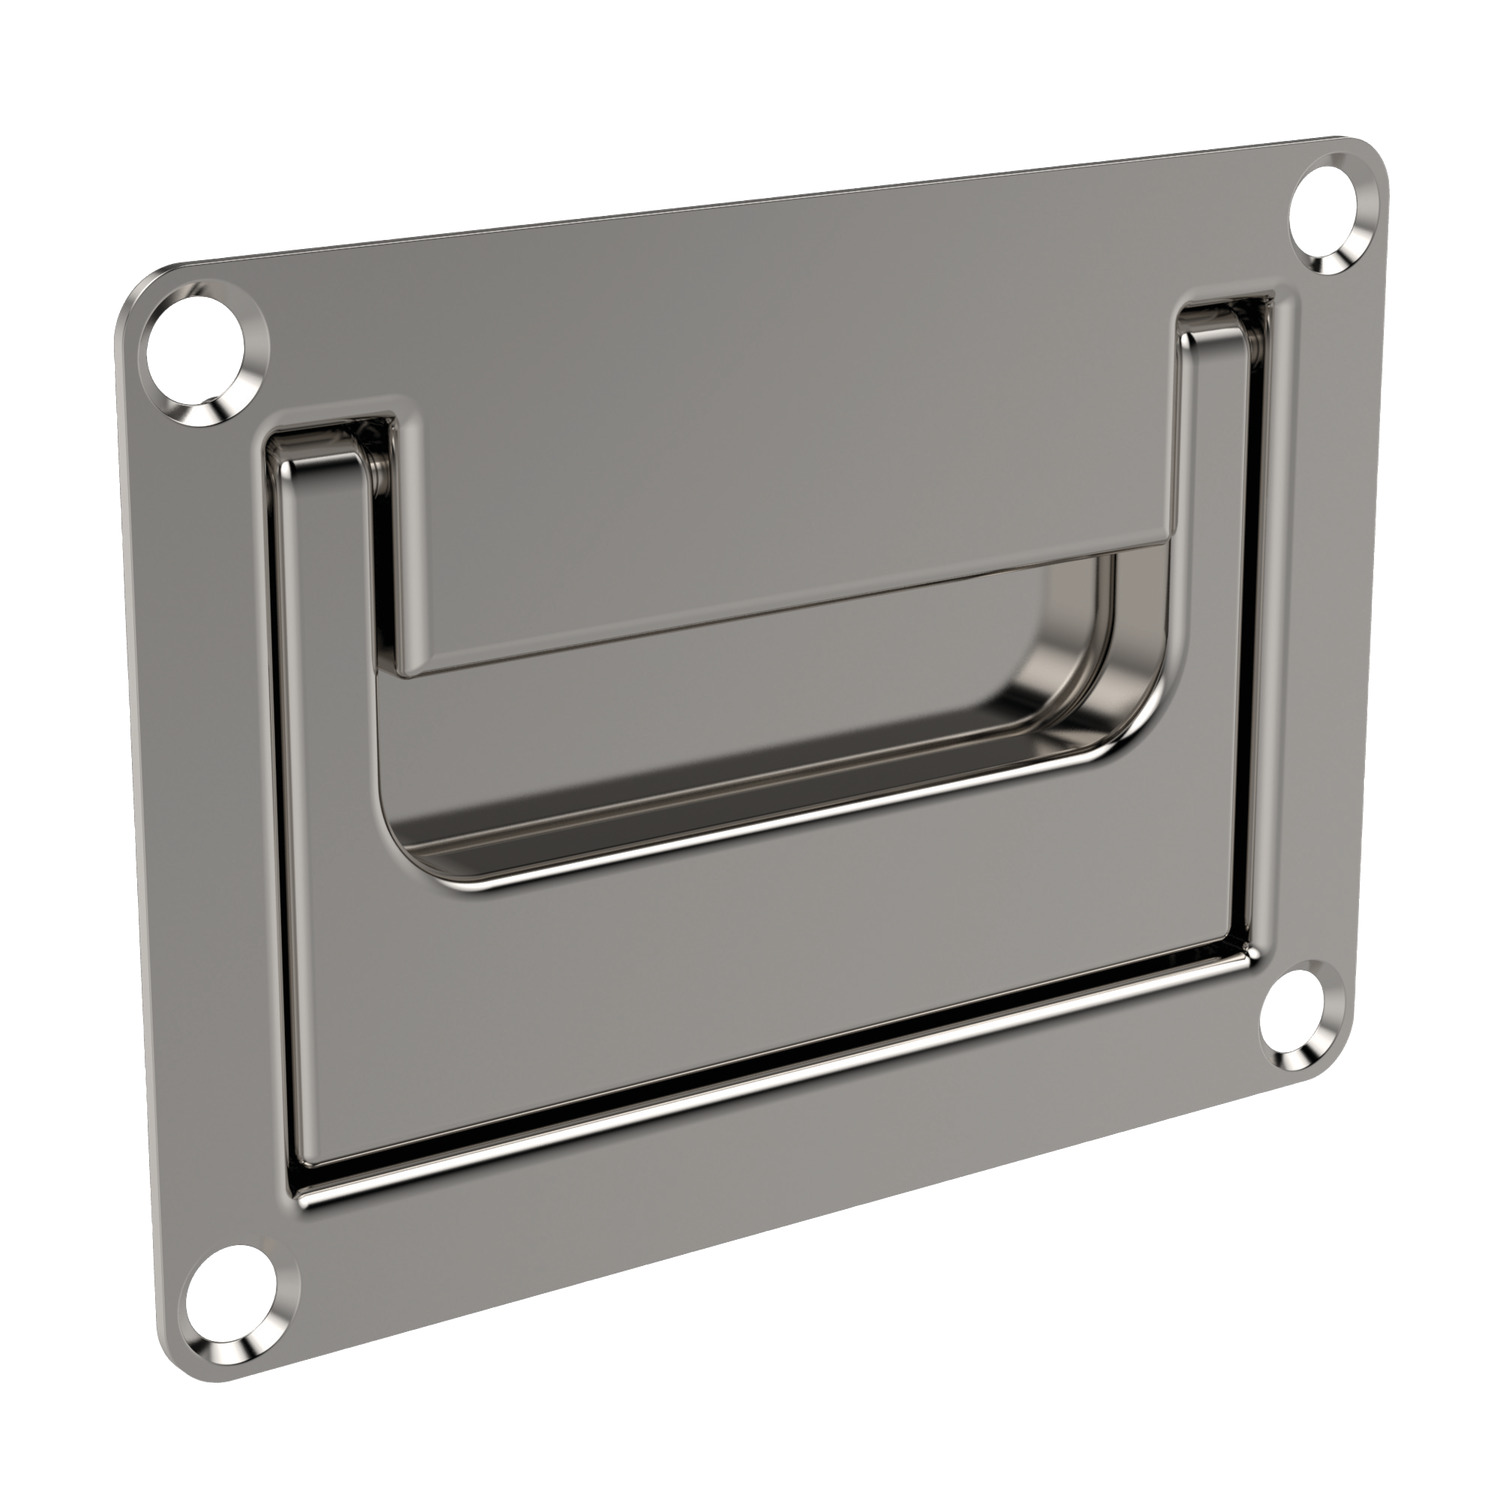 Tray Handle, Collapsible A spring return mechanism returns the handle to resting position when release. This is particularly useful for safety focused and space efficient applications.